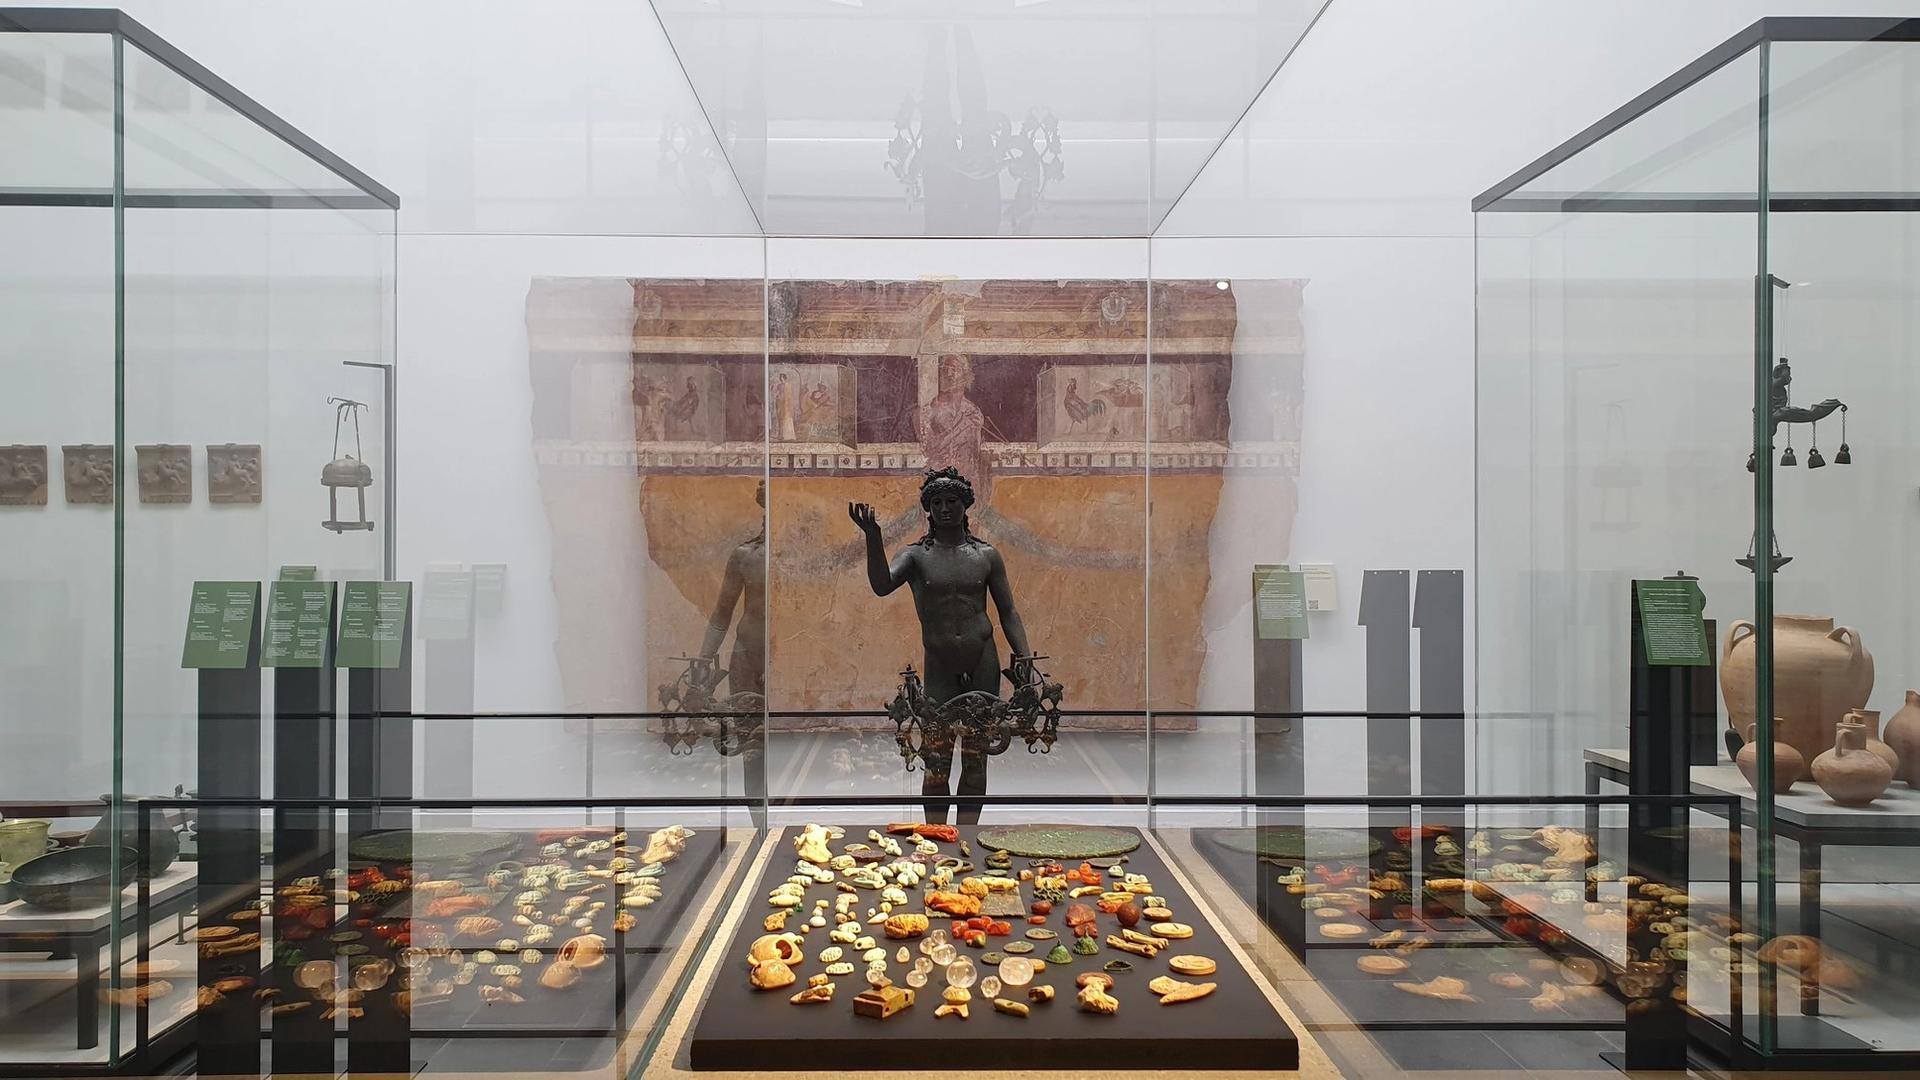 The newly refurbished Antiquarium museum opened on 25 January at Pompeii with a permanent exhibition on the history of the ancient city Parco Archeologico di Pompei